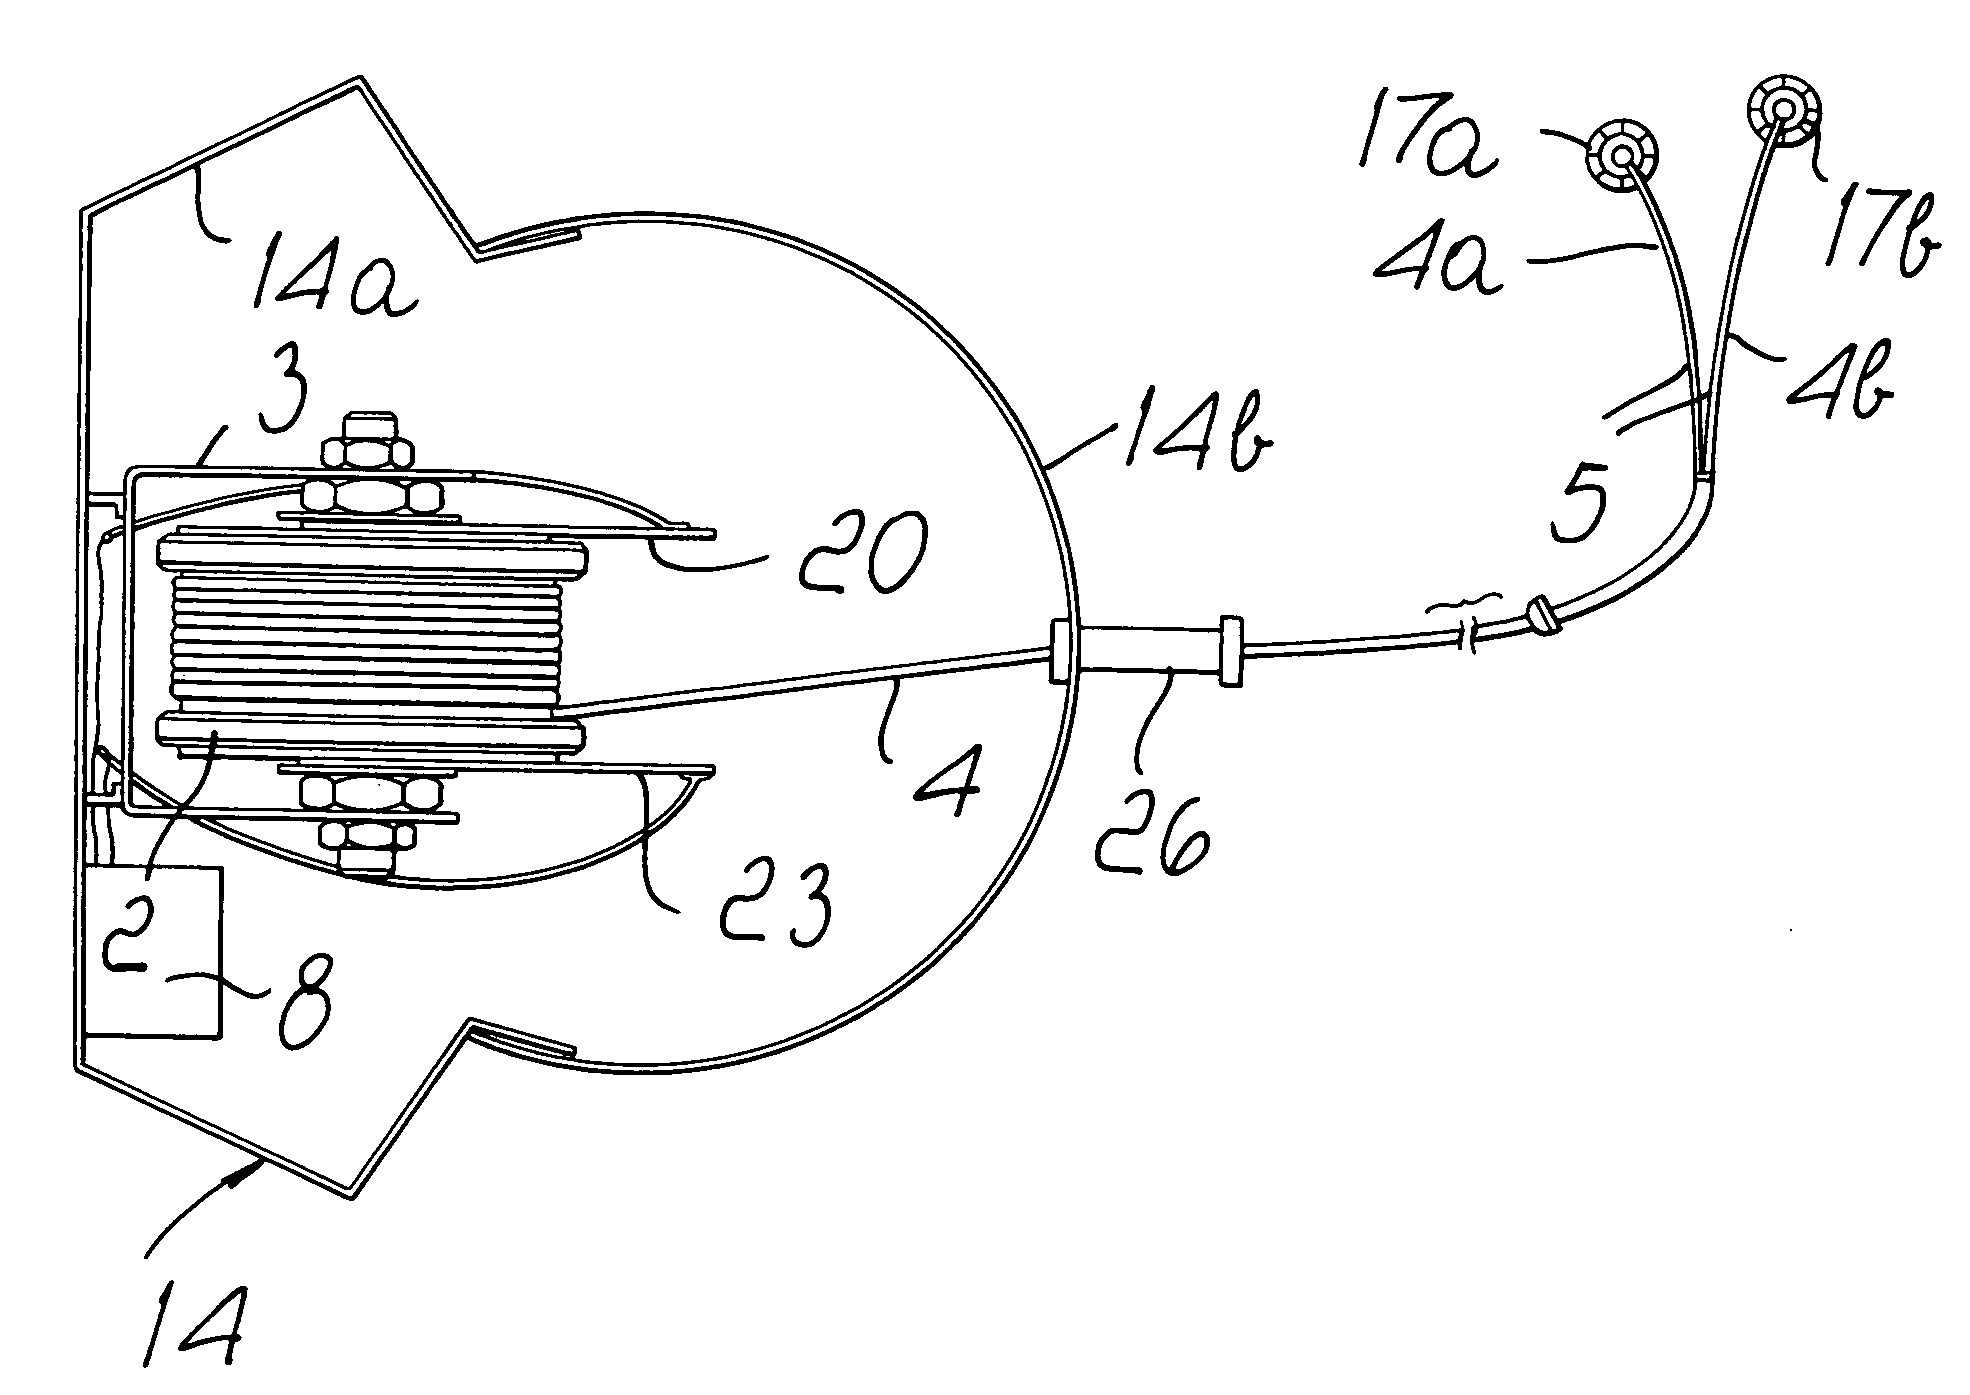 Anti-theft device particularly for point of sale displays